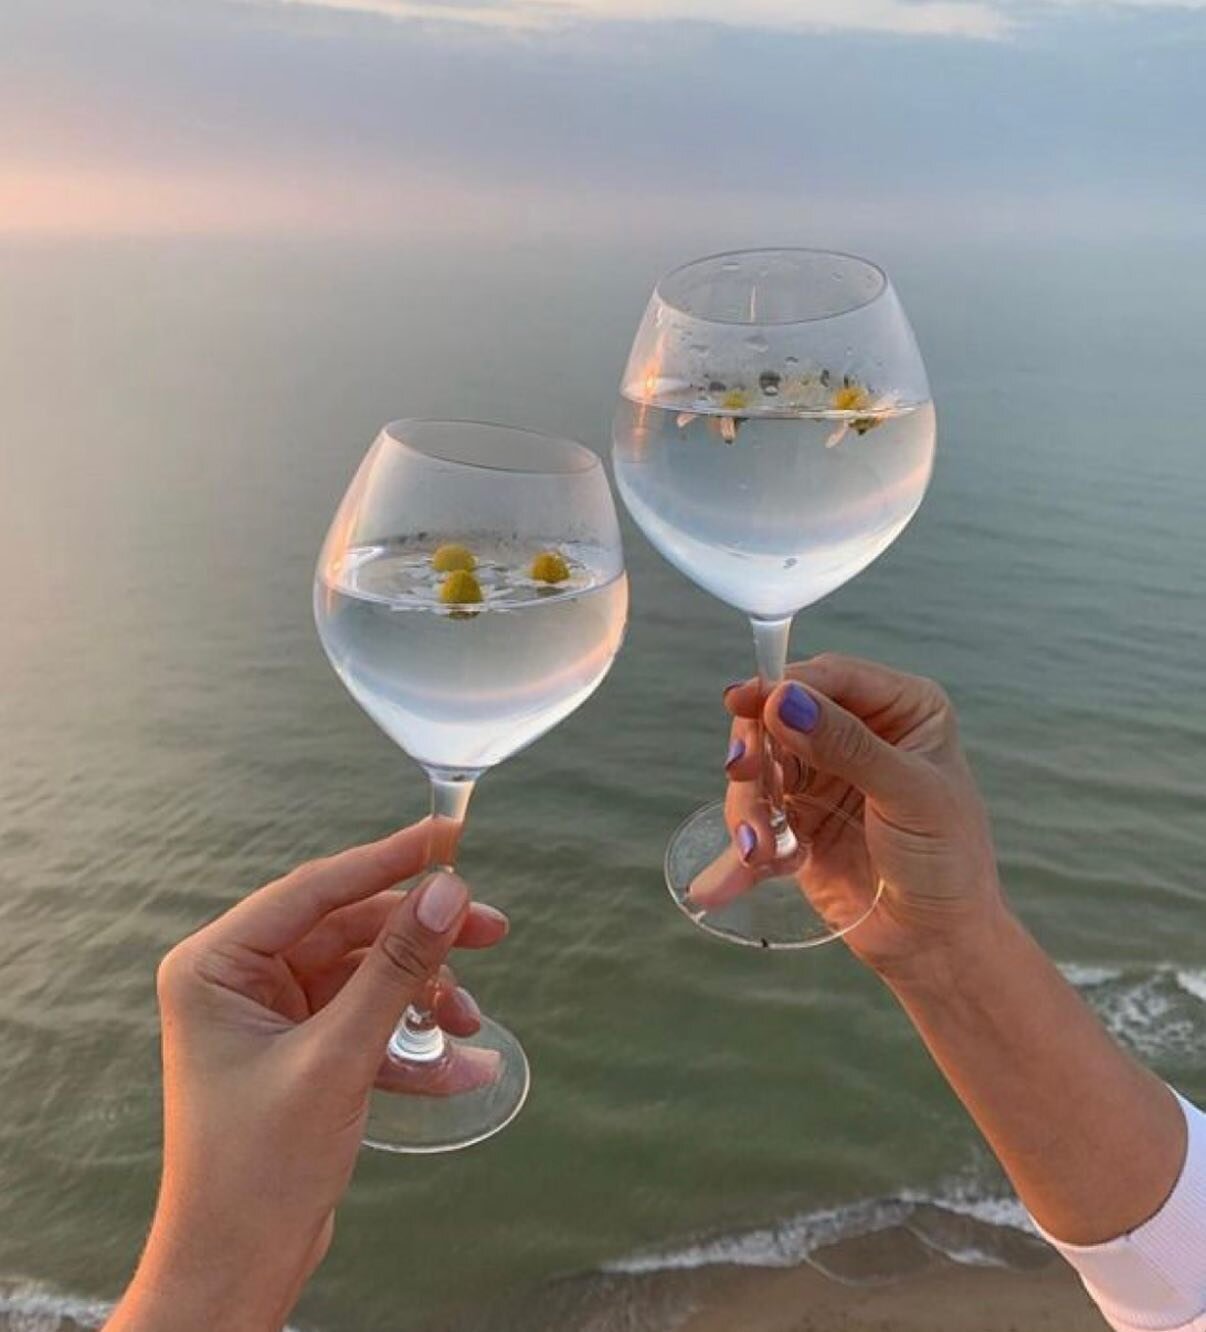 Cheers to Friday ✨
.
.
📷 @pinterest 
.
.
.
.
.
#water #cheers #hydrate #hydrateskin #scenic #scenicview #ocean #relaxation #vacation #luxury #beautifuldestinations #smallbusiness #smallbiz #smallbusinesssupport #skincareproducts #cleanskincare #heal